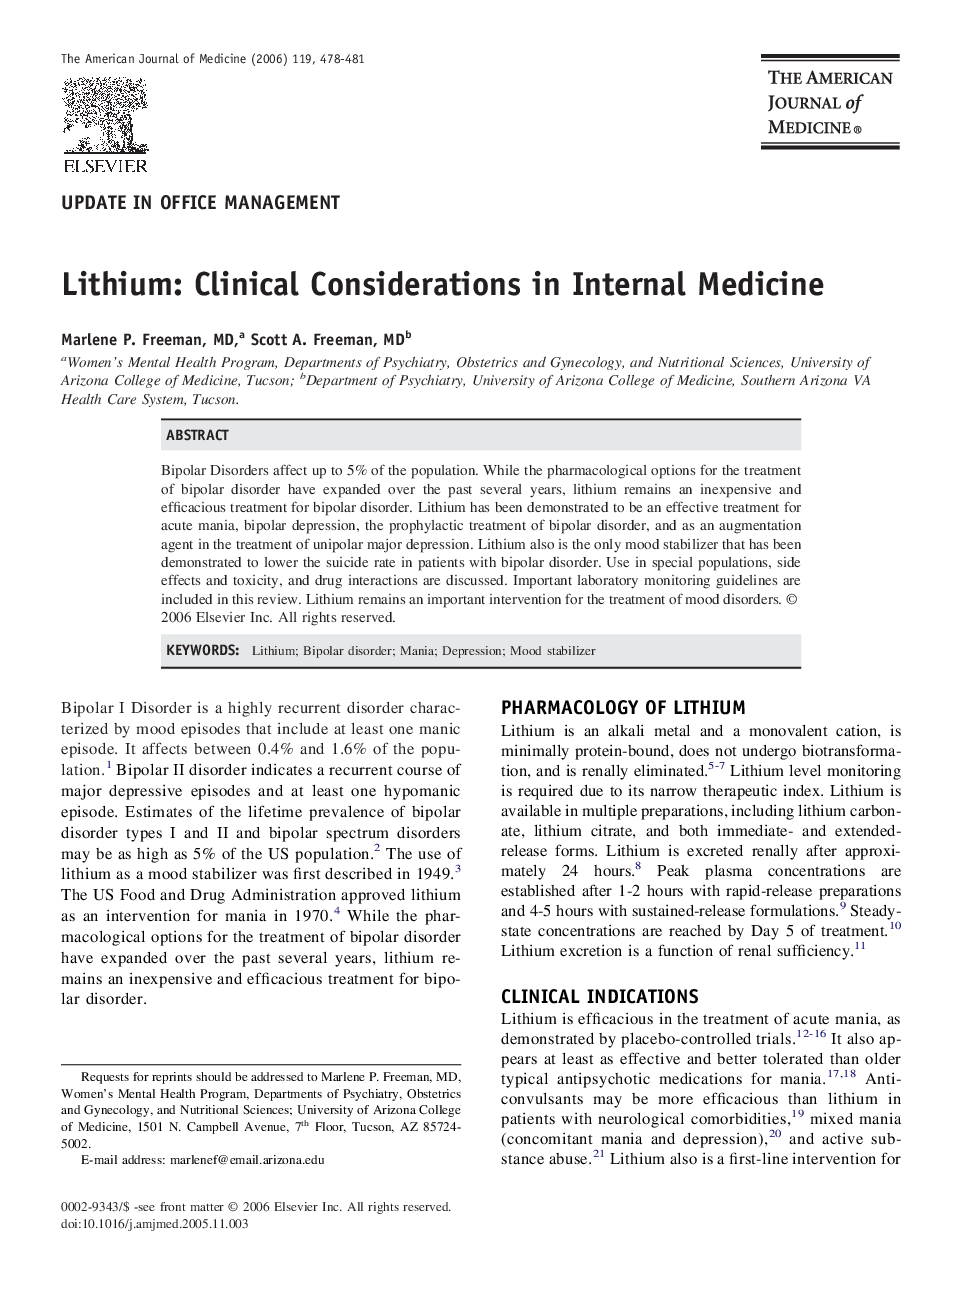 Lithium: Clinical Considerations in Internal Medicine